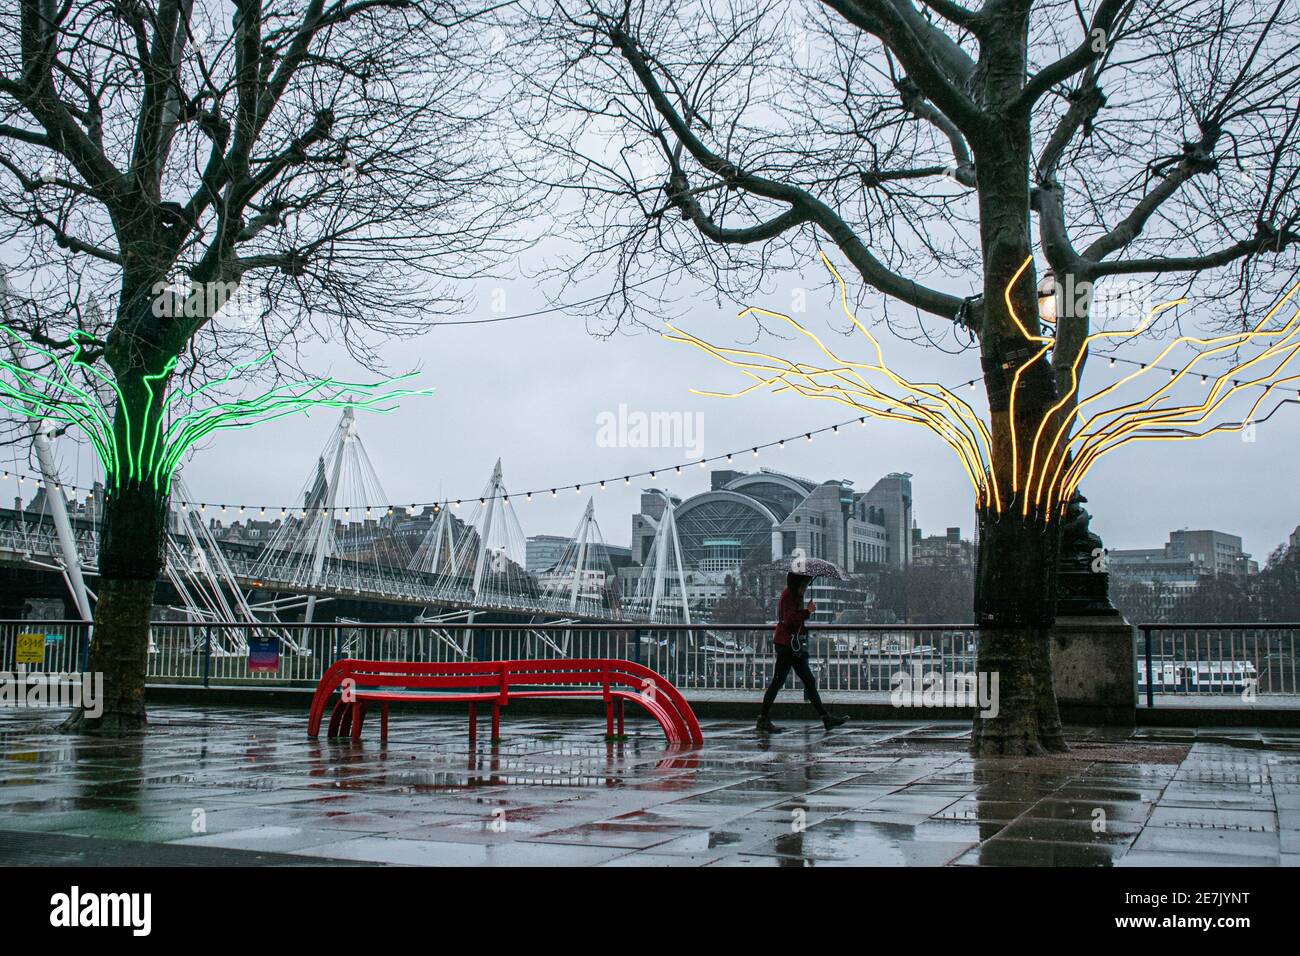 WESTMINSTER LONDON, UK  30 January 20 A pedestrian with an  umbrella walks past the David Ogle installation 'Loomin' on London Southbank on a wet and rainy day. The Met office has issued weather warnings for downpours in the coming days and snow  in northern  parts of the UK. Credit: amer ghazzal/Alamy Live News Stock Photo